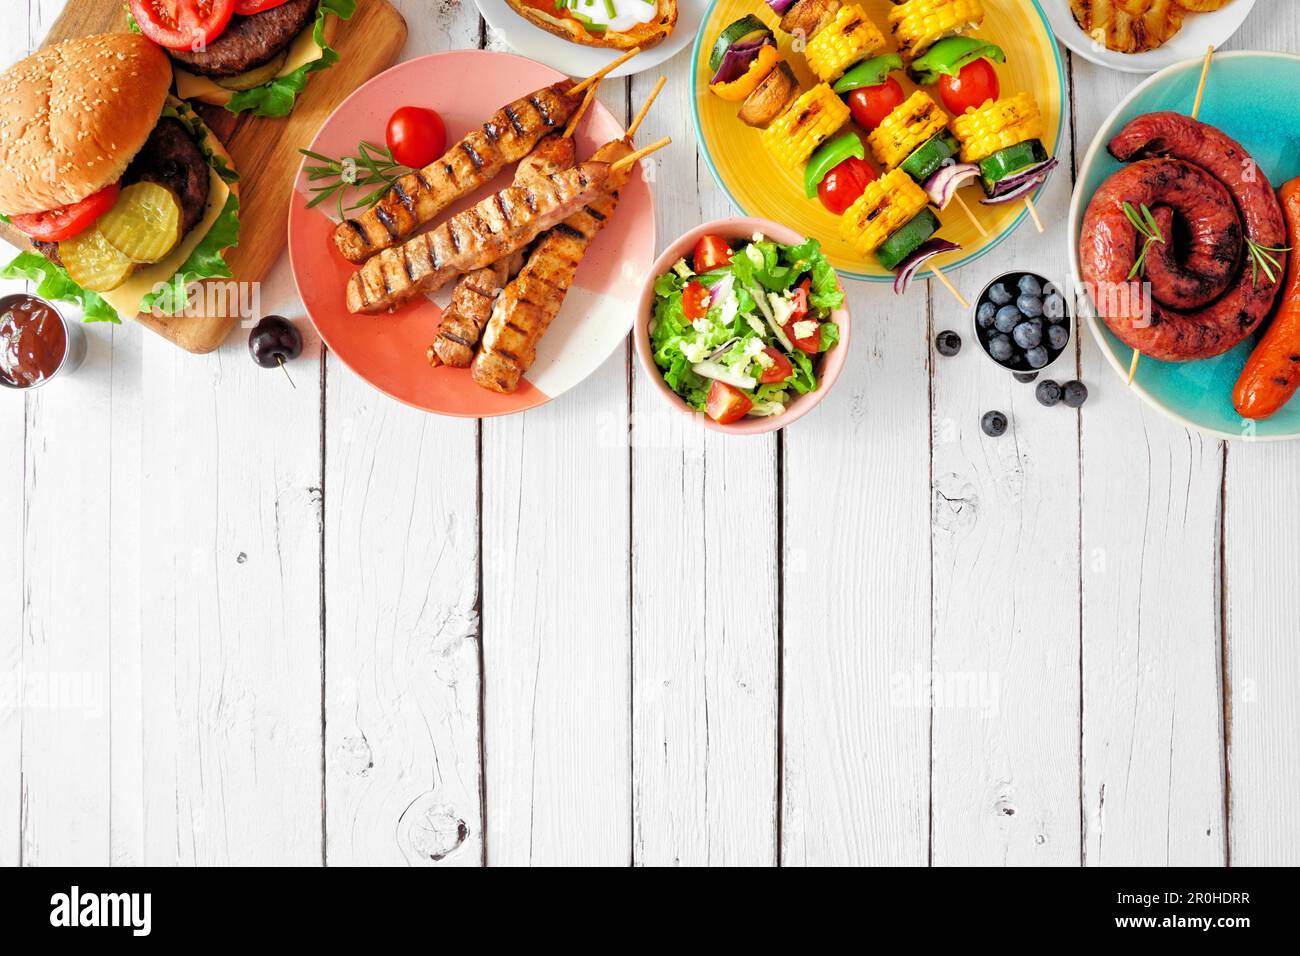 Summer BBQ or picnic food top border. Variety of burgers, grilled meat, vegetables, fruits, salad and potatoes. Overhead view on a white wood backgrou Stock Photo